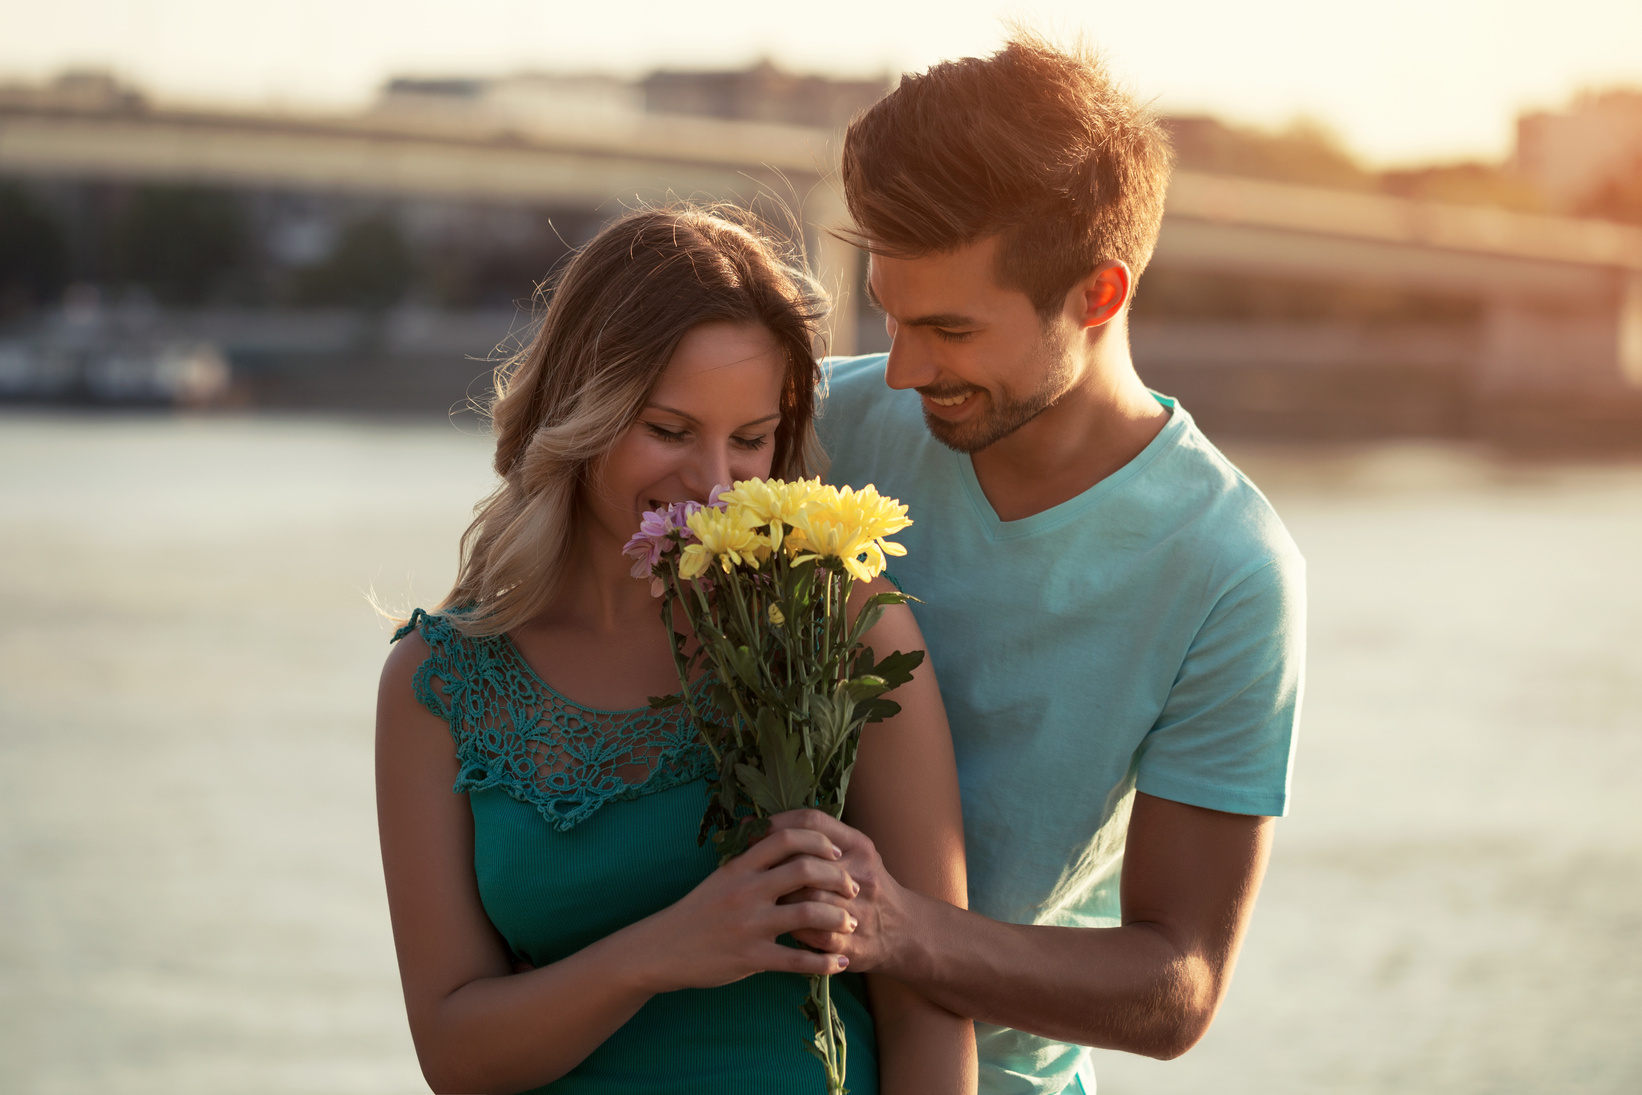 Man giving flowers to his girlfriend